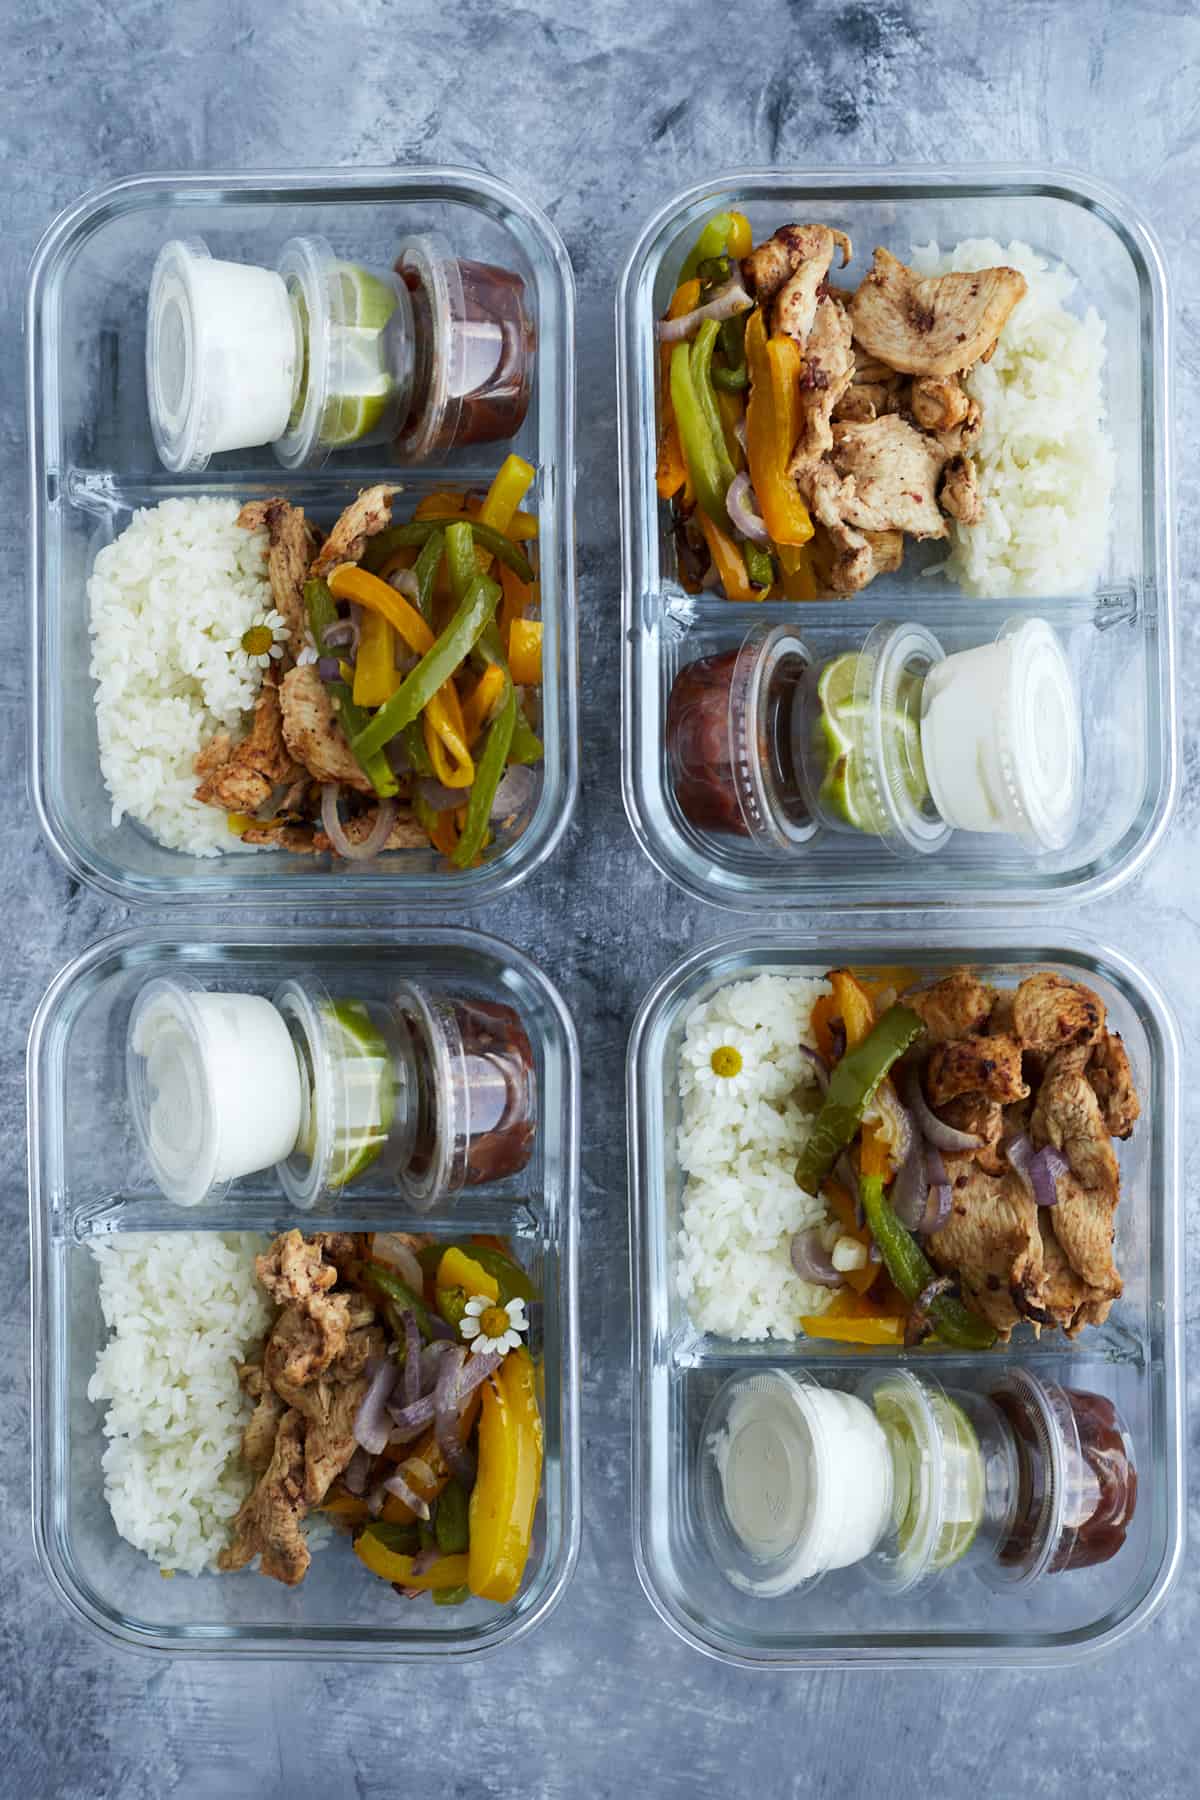 4 Tips To Make Meal Prepping Breeze! - Pre